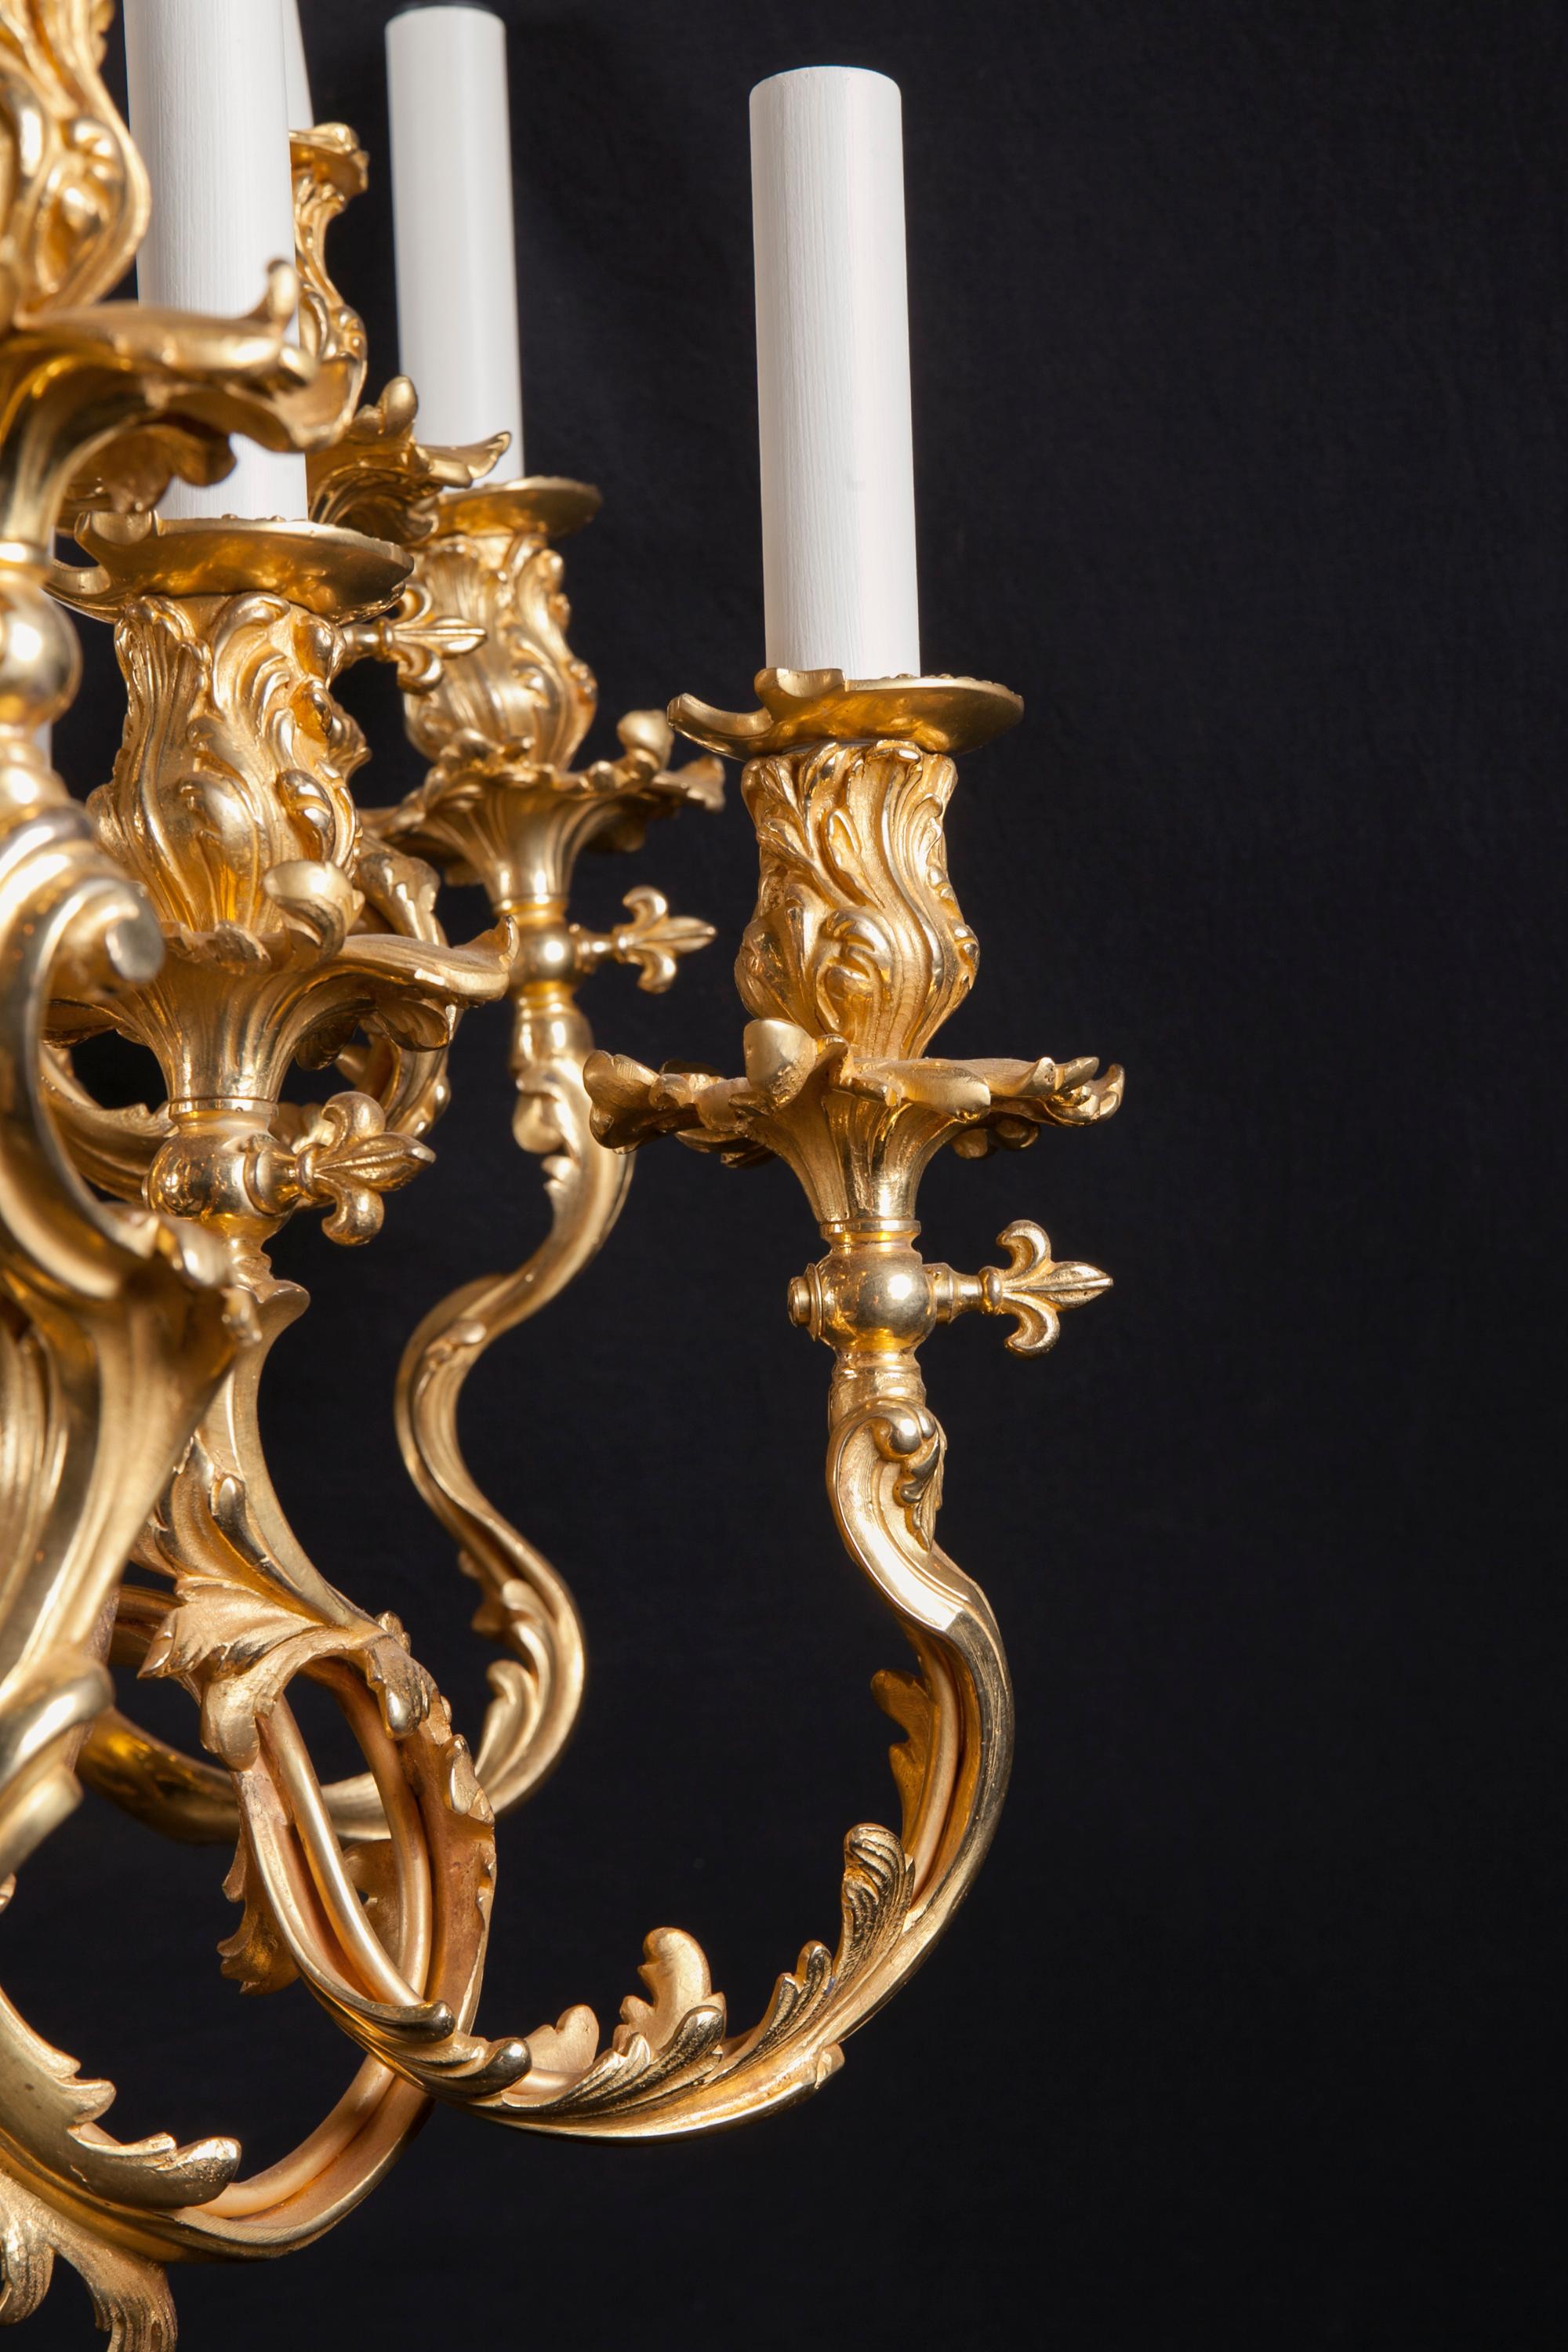 This fantastic Rococo chandelier features finely chiseled bronze d’ore. The piece was originally made for gas and uniquely sports horizontal fleur de lis key at the base of each cup to turn the flow of gas on and off. Dating back to the 19th